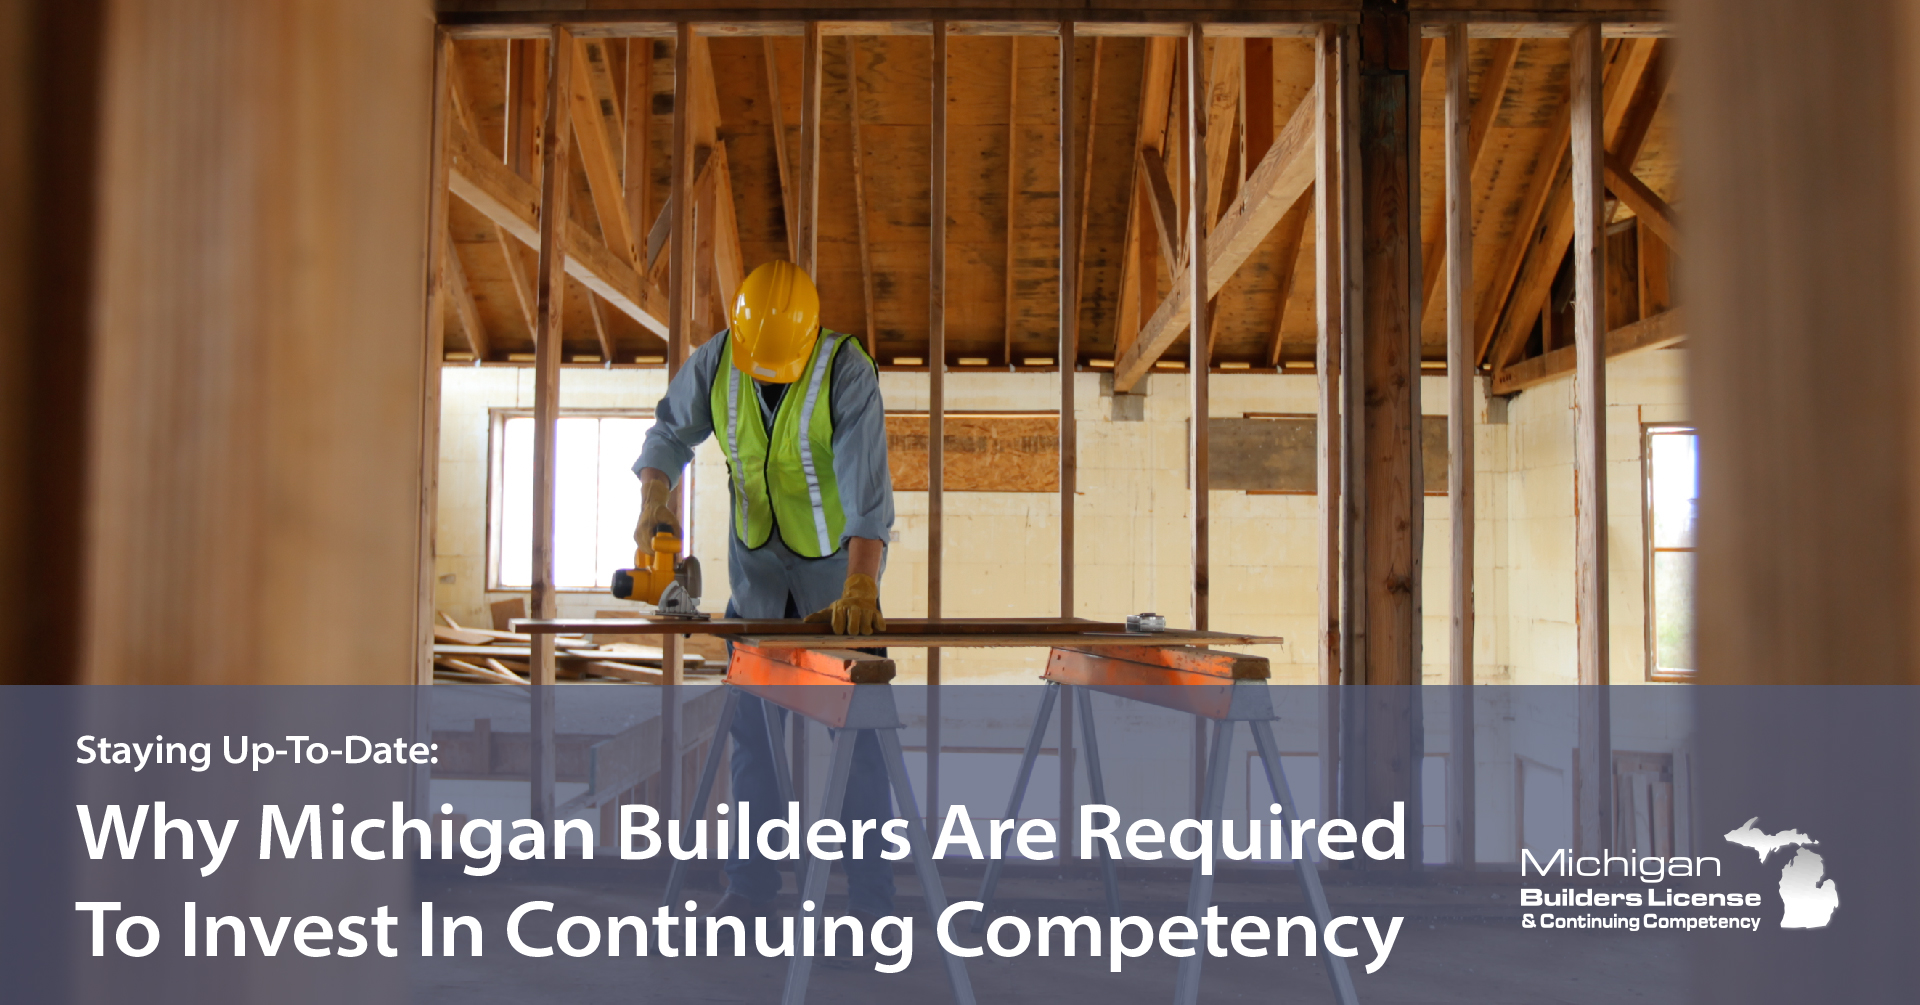 Staying Up-To-Date: Why Michigan Builders Are Required To Invest In Continuing Competency